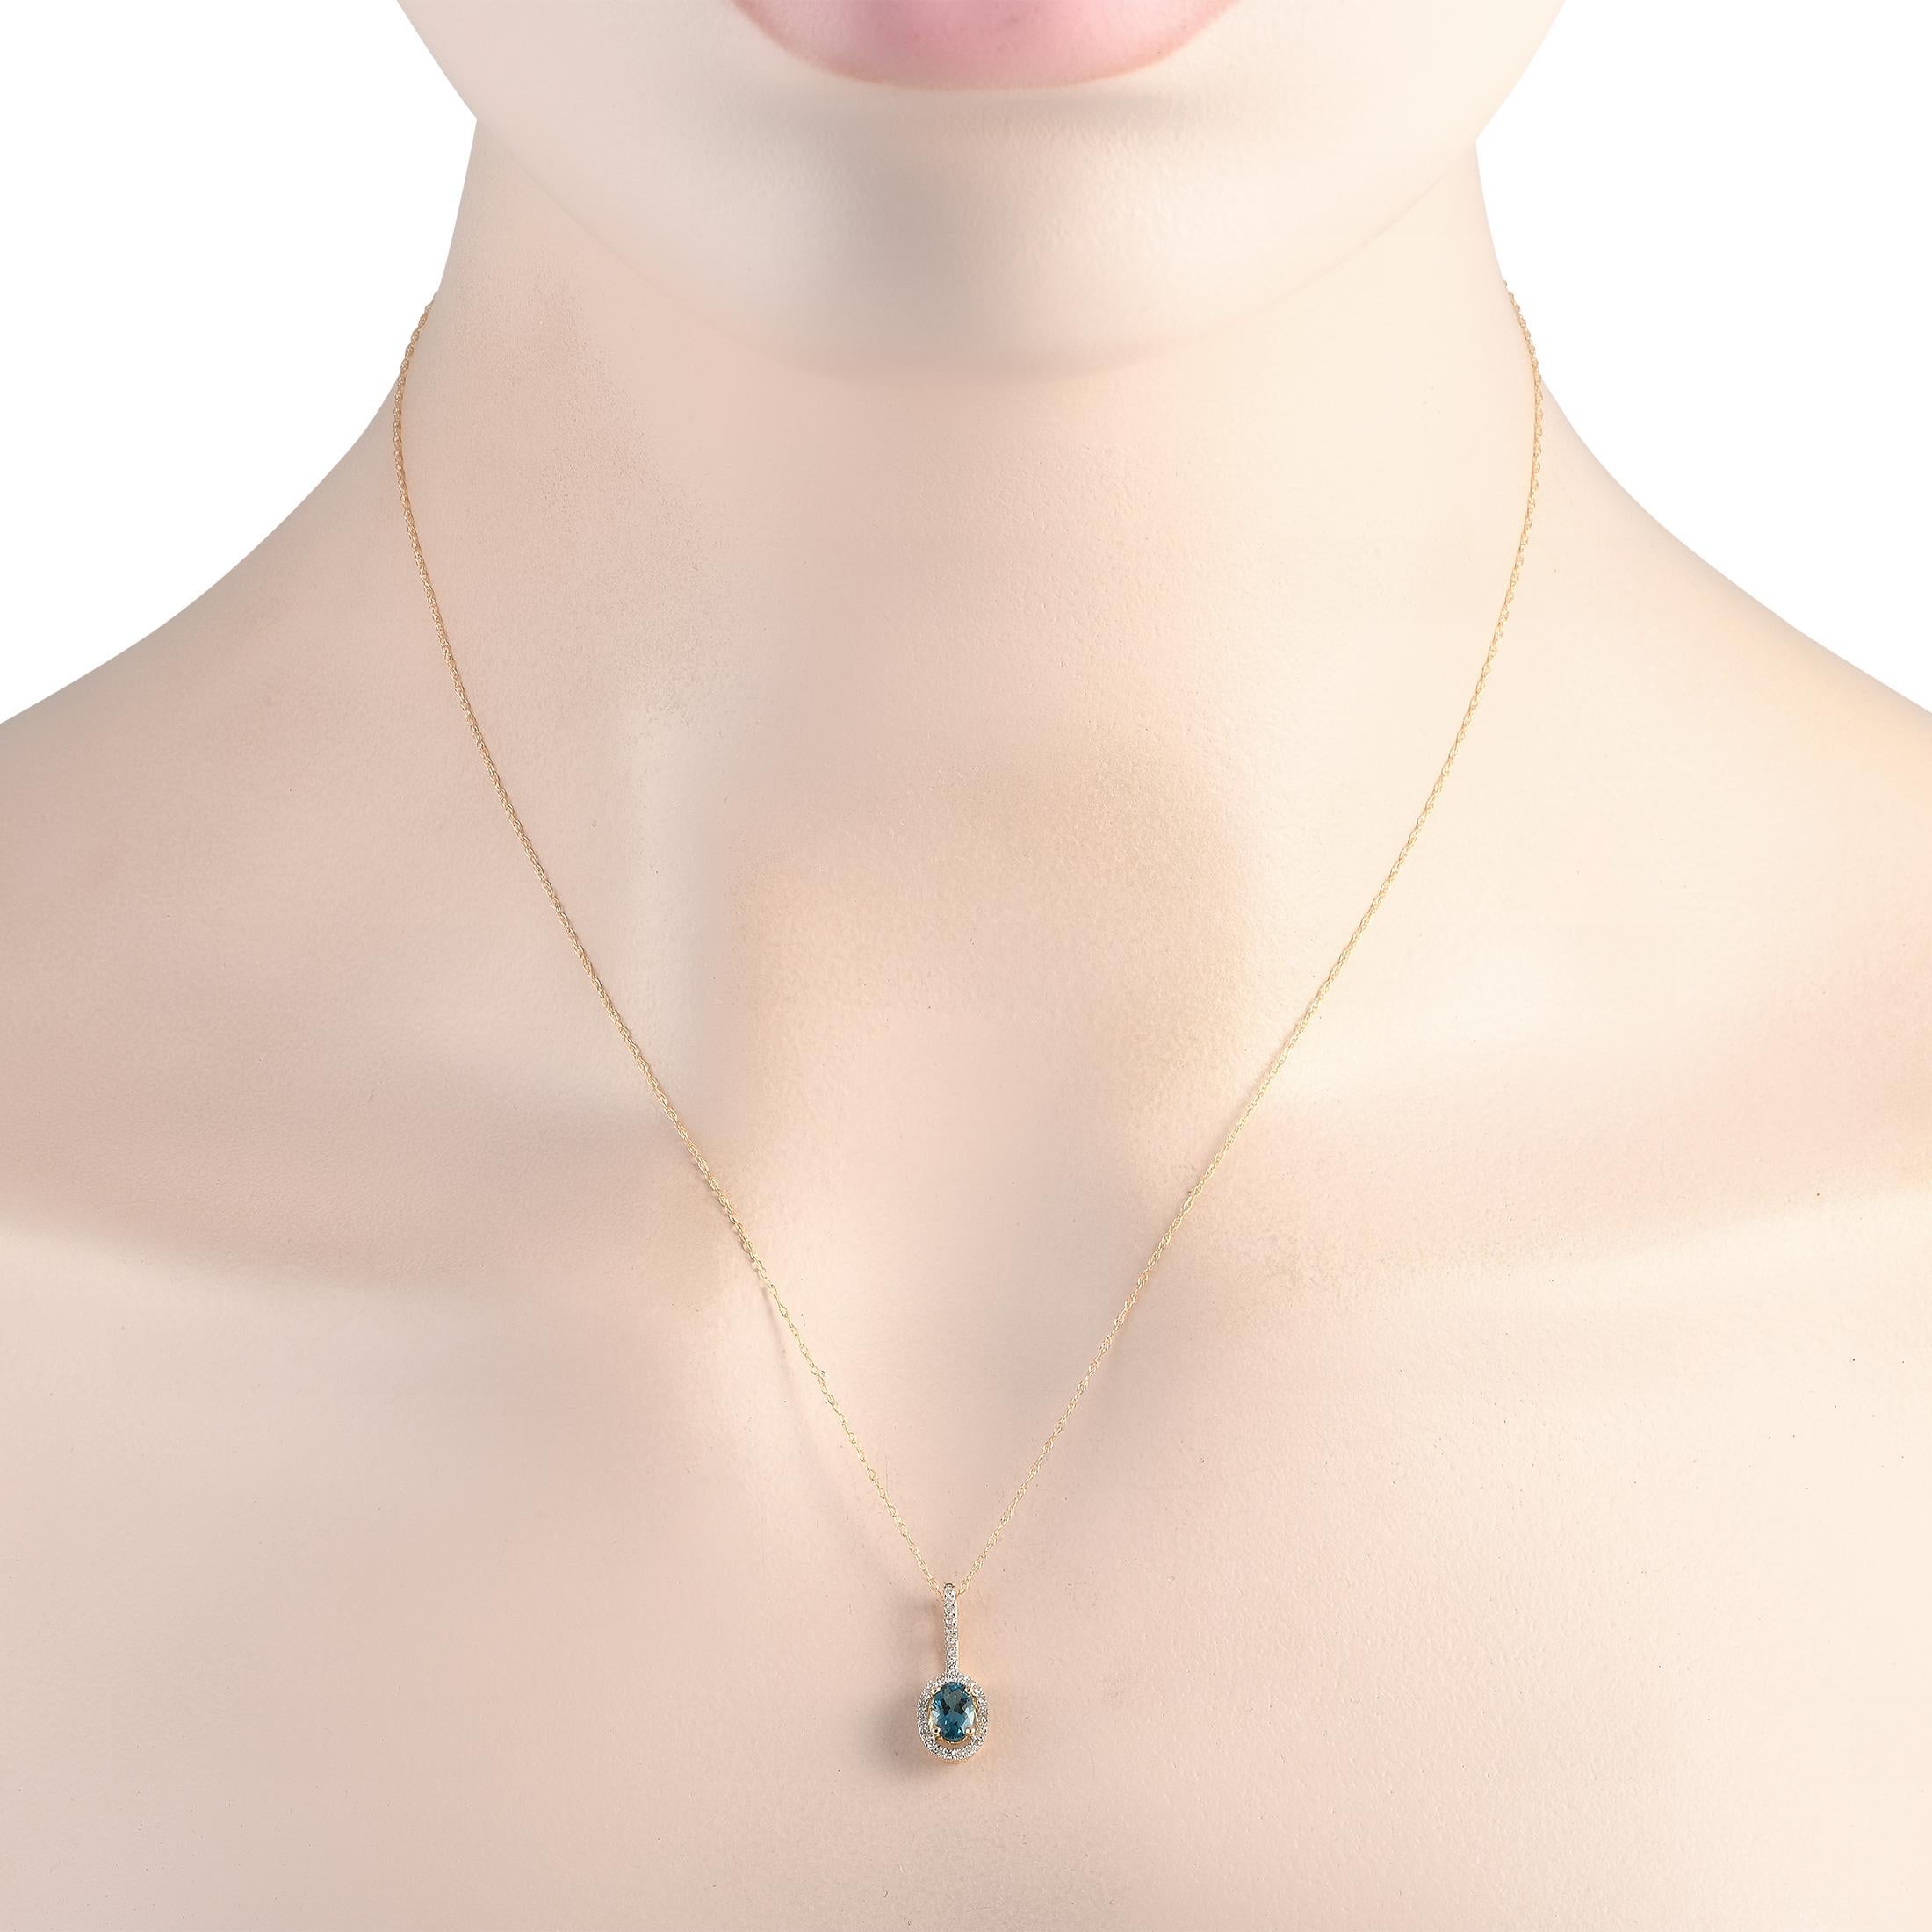 Add luxury to your daily style with this diamond and blue topaz necklace. It is crafted in 14K yellow gold, with a double cable chain measuring 18 inches long. The bail shimmers with petite round diamonds, complementing the oval frame surrounding